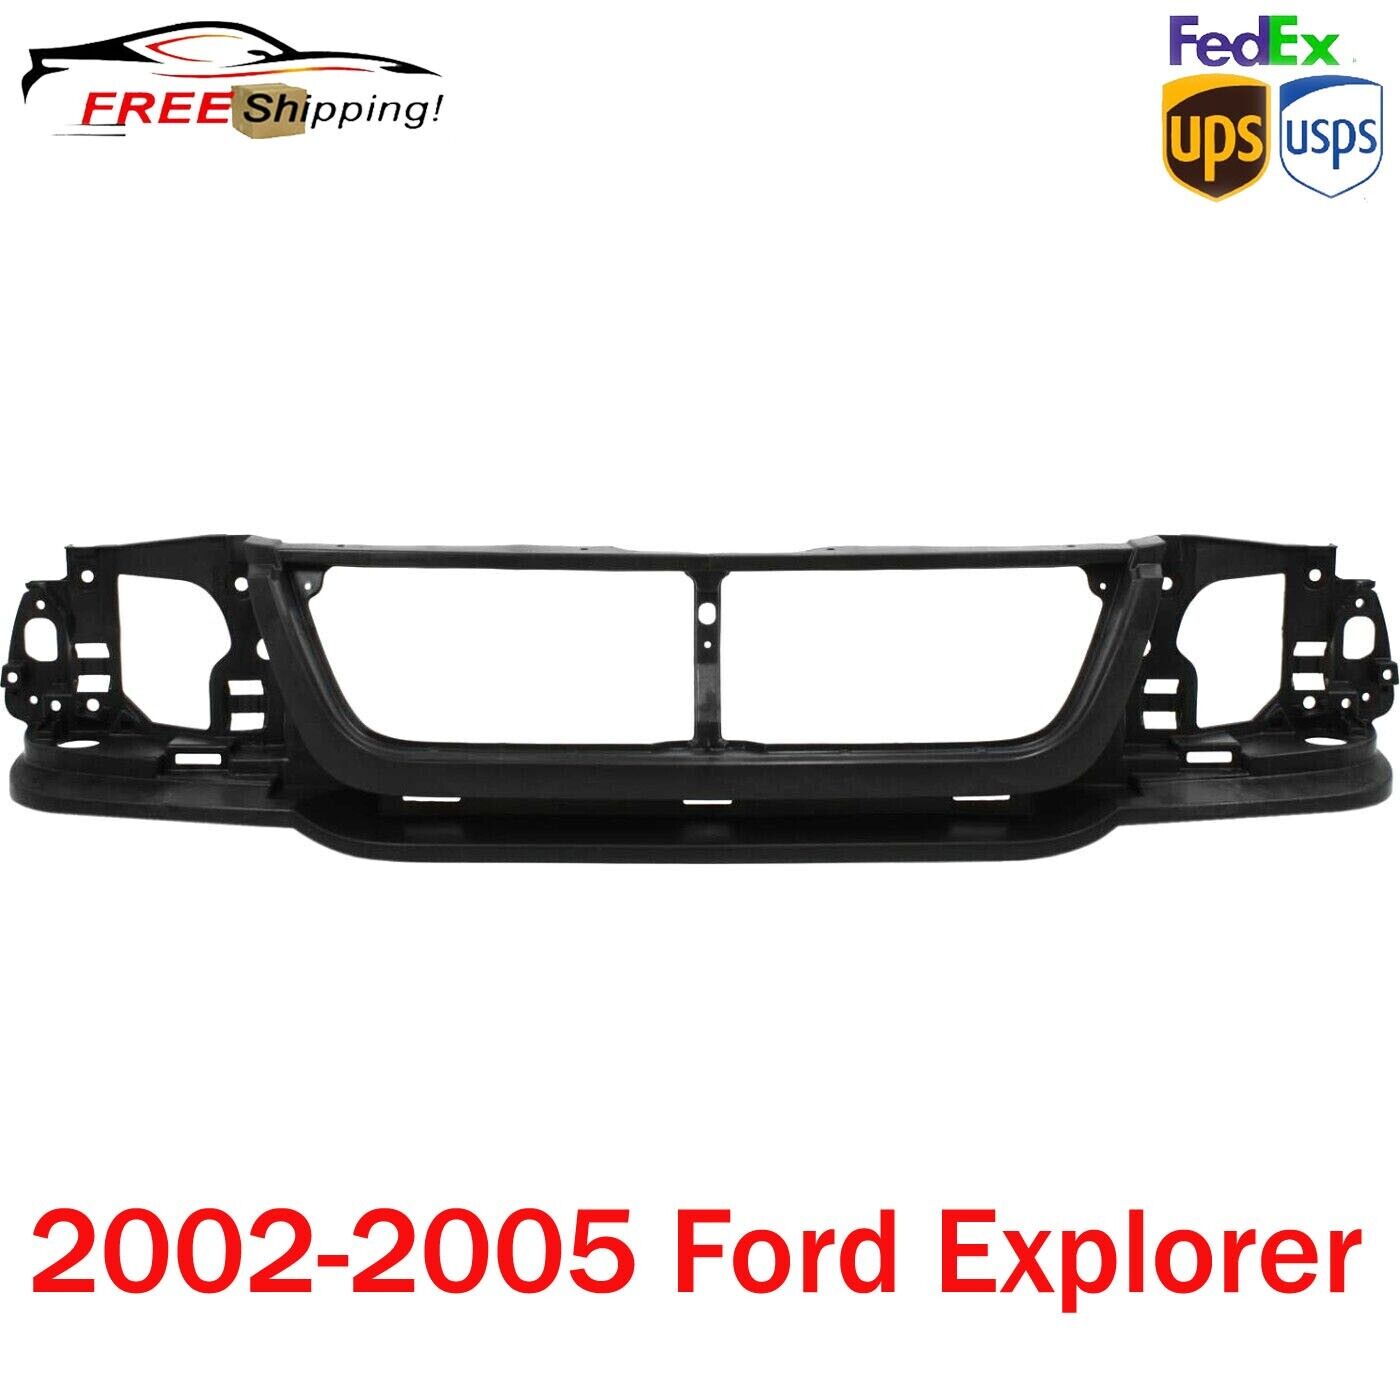 New Header Panel For 2002-2005 Ford Explorer Grille Opening Panel FO1221123